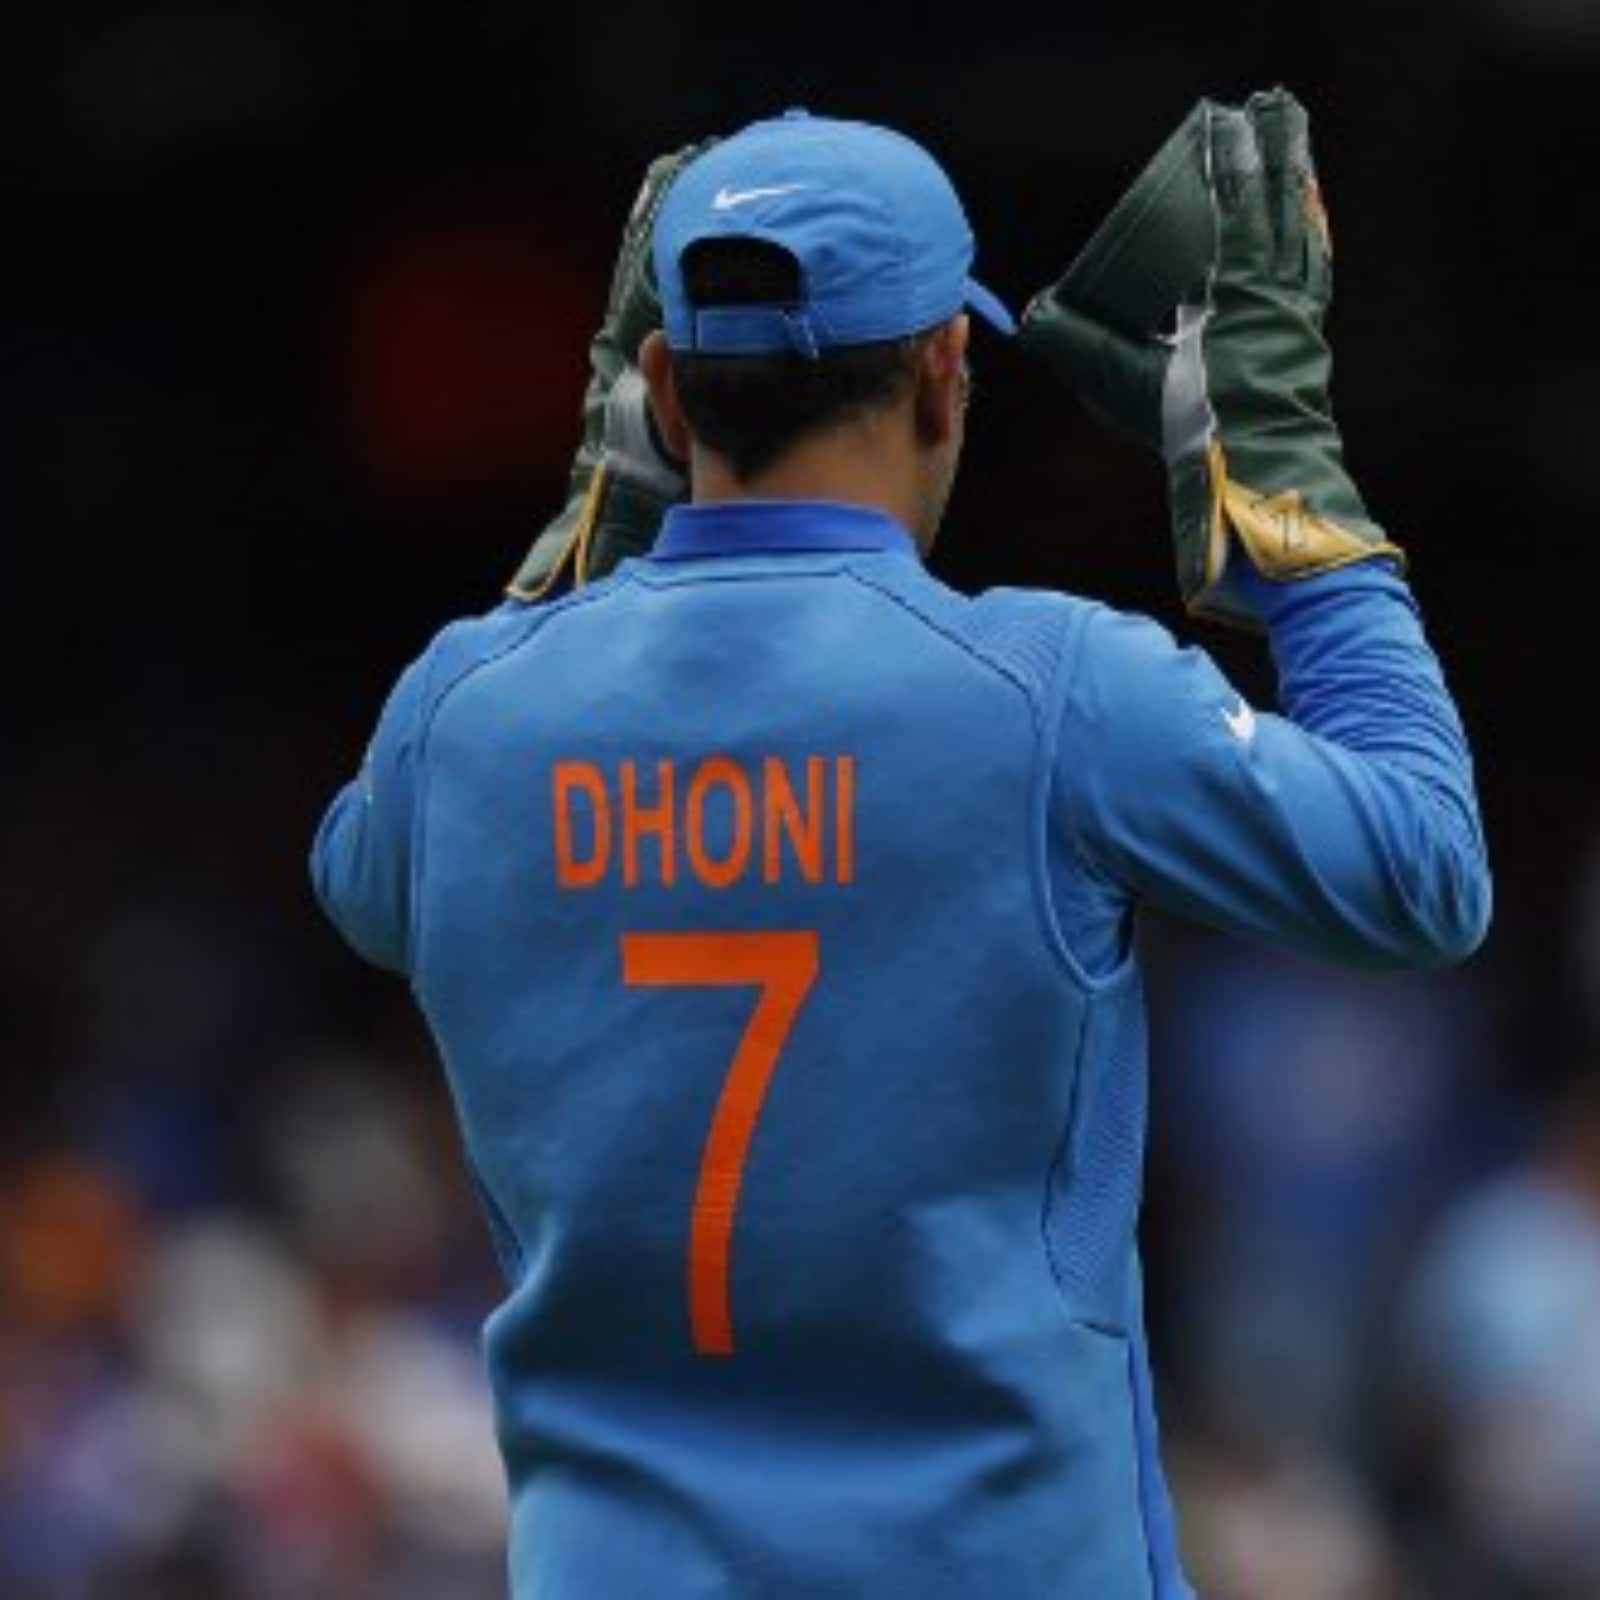 MS Dhoni opens up on his No. 7 jersey; 'One number that is close